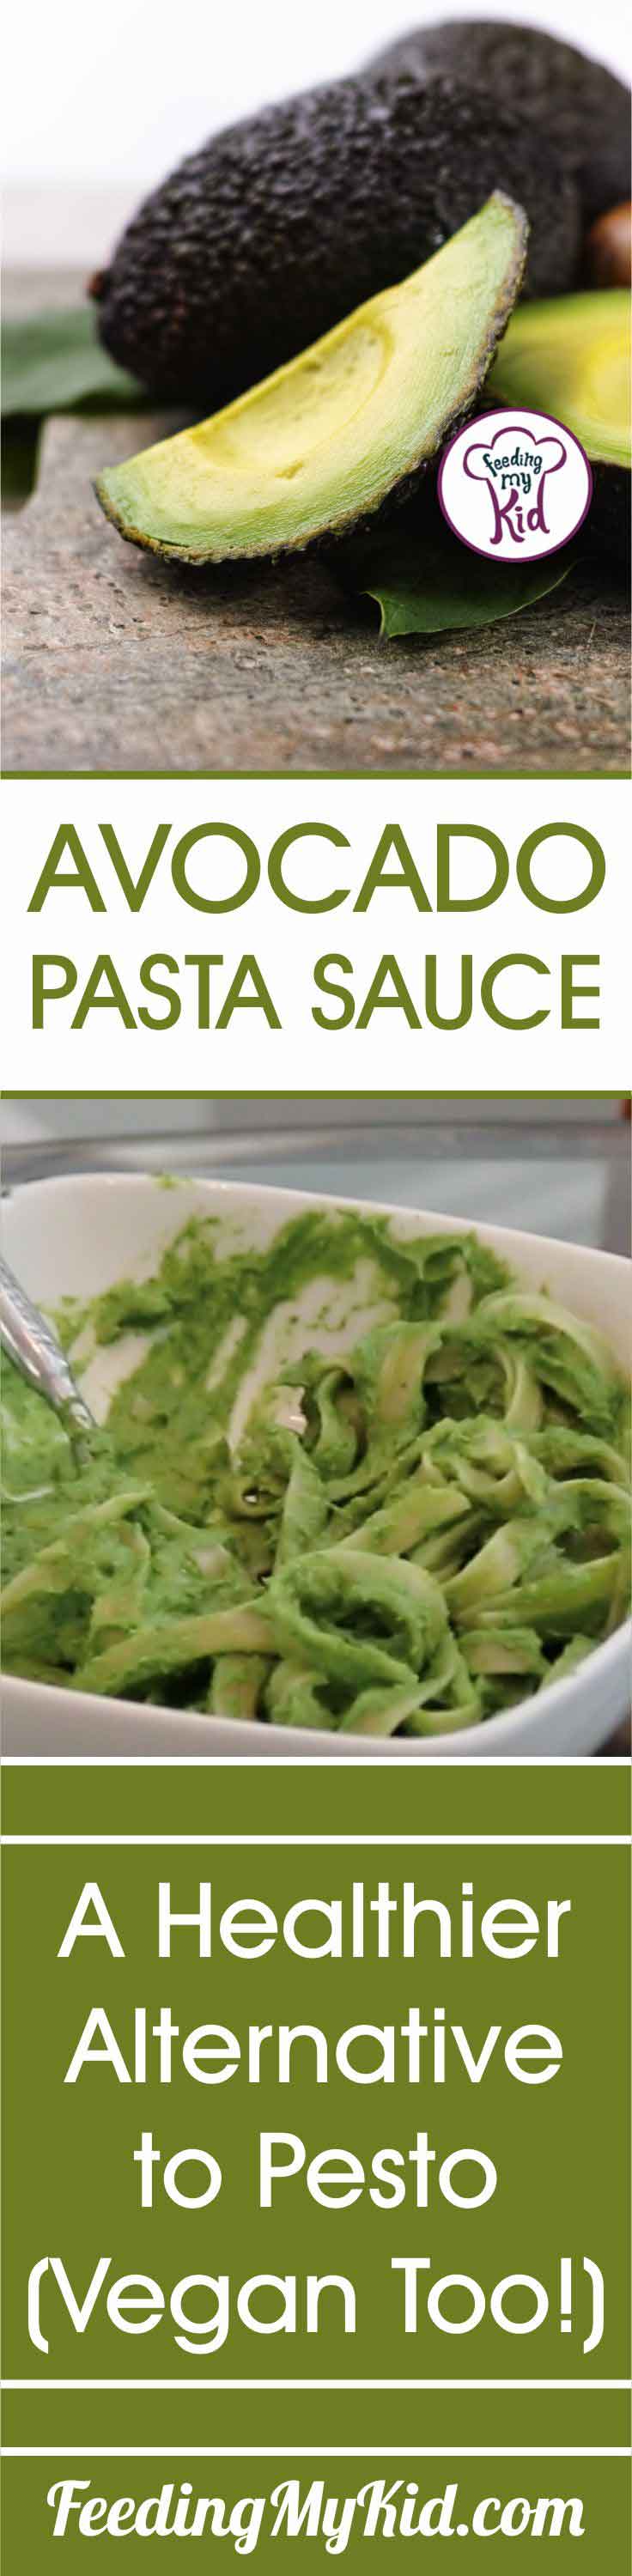 I made this avocado pasta sauce as a healthier alternative to classic pesto. Avocados are loaded with healthy fats and create a creamy sauce.